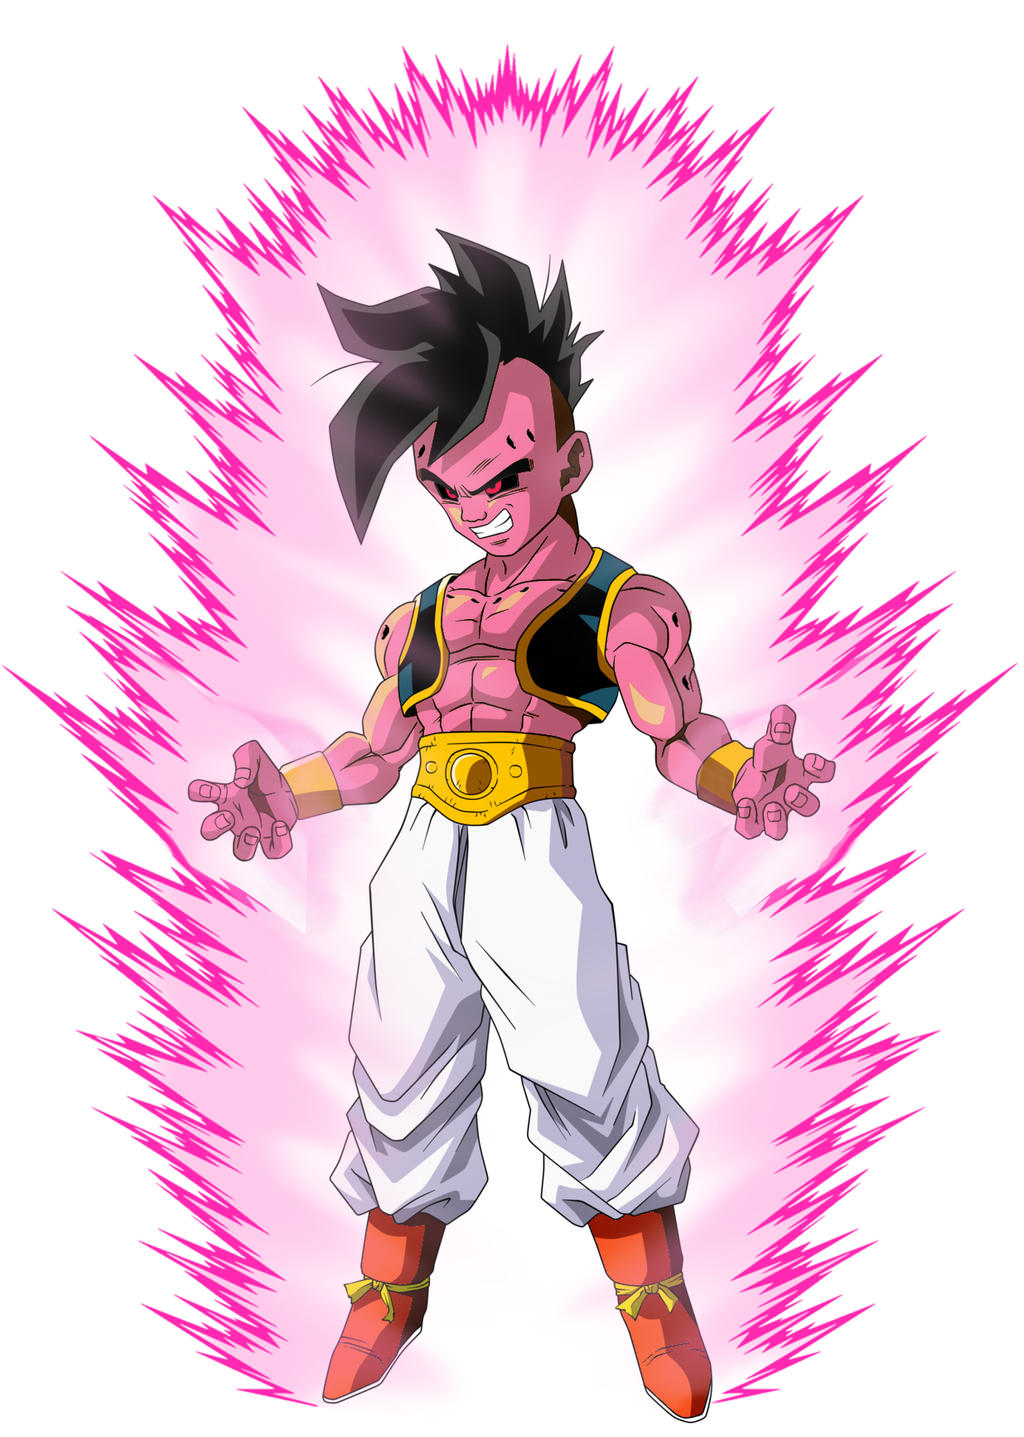 Dragon Ball Z - Uub by DBCProject on DeviantArt